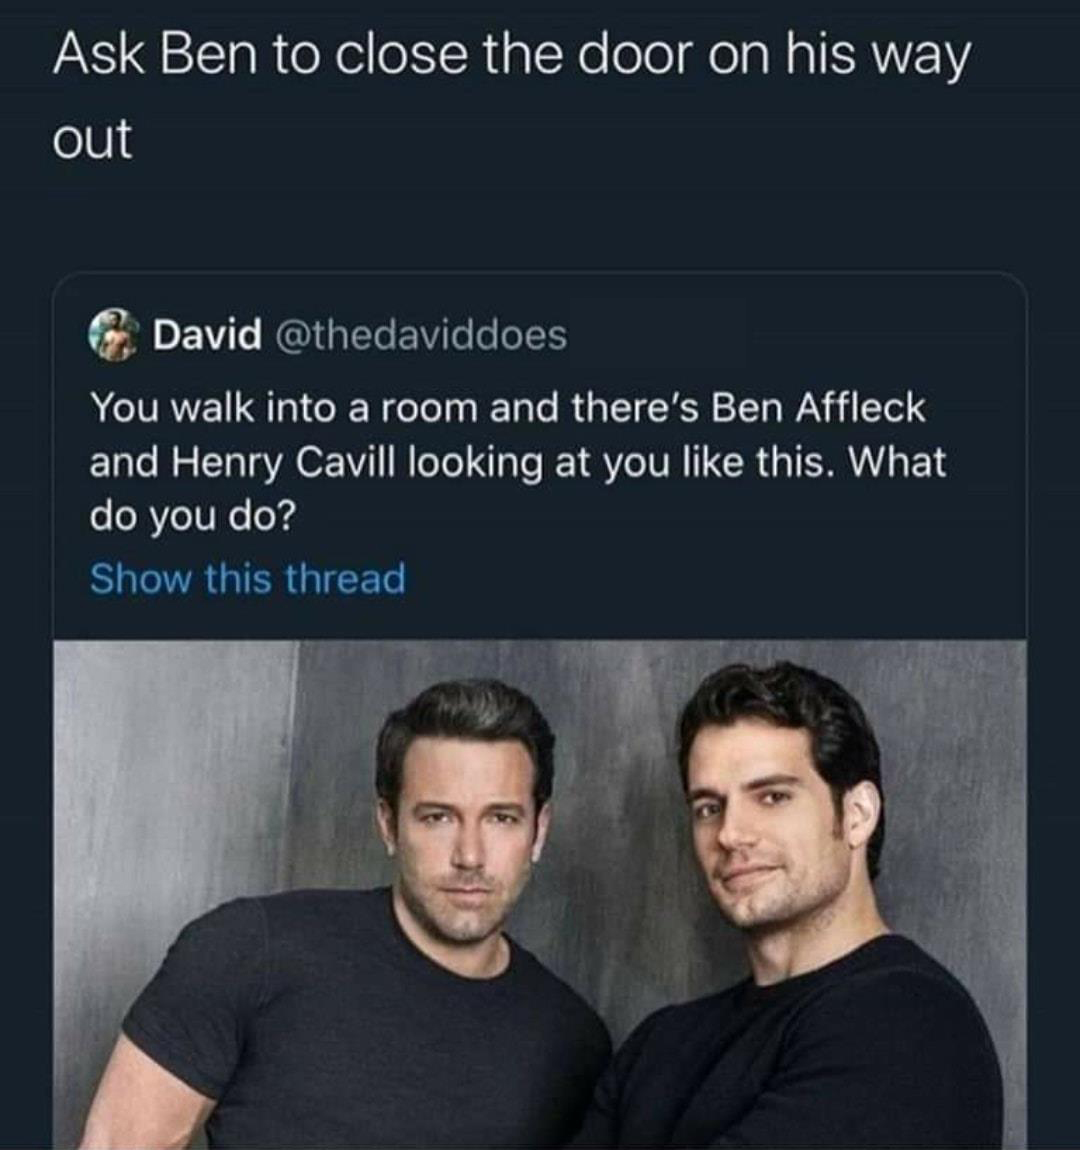 Witcher memes - henry cavill and ben affleck - Ask Ben to close the door on his way out David You walk into a room and there's Ben Affleck and Henry Cavill looking at you this. What do you do? Show this thread